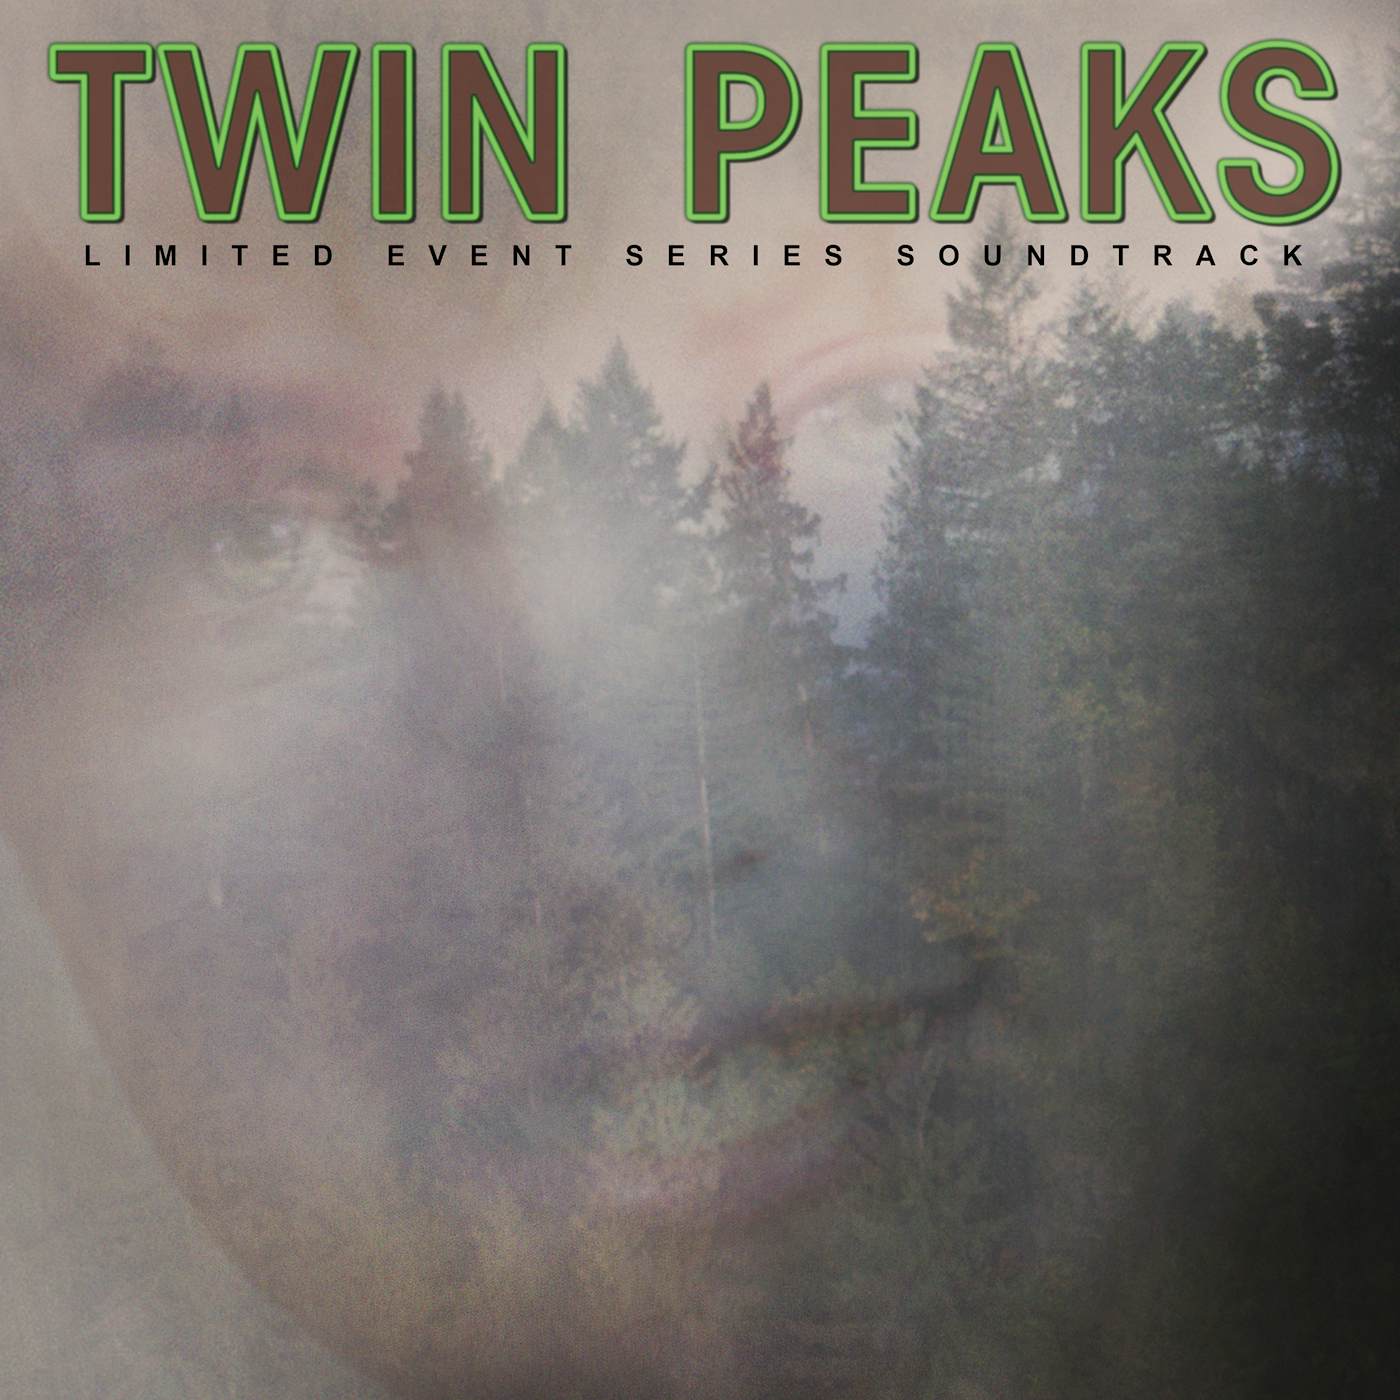 TWIN PEAKS - LIMITED EVENT SERIES SOUNDTRACK Vinyl Record